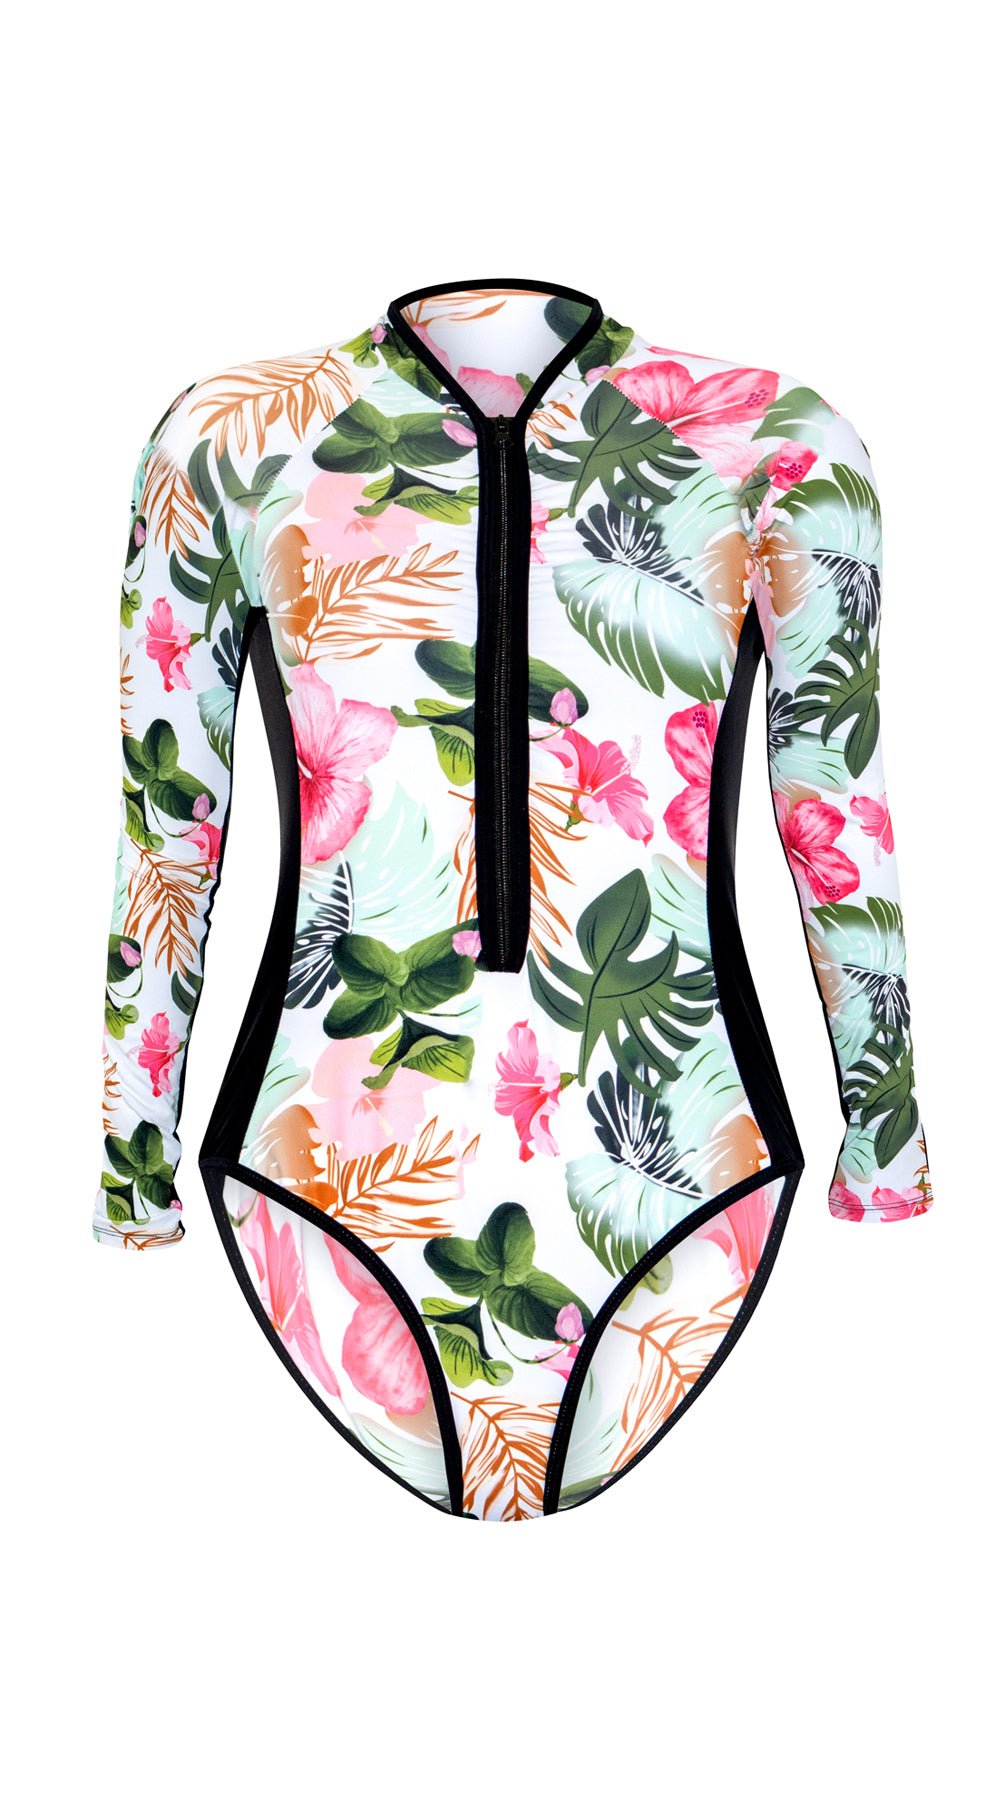 Essentials Green Multiprint Long Sleeve Suit - Bare Essentials
One Piece Swimsuits